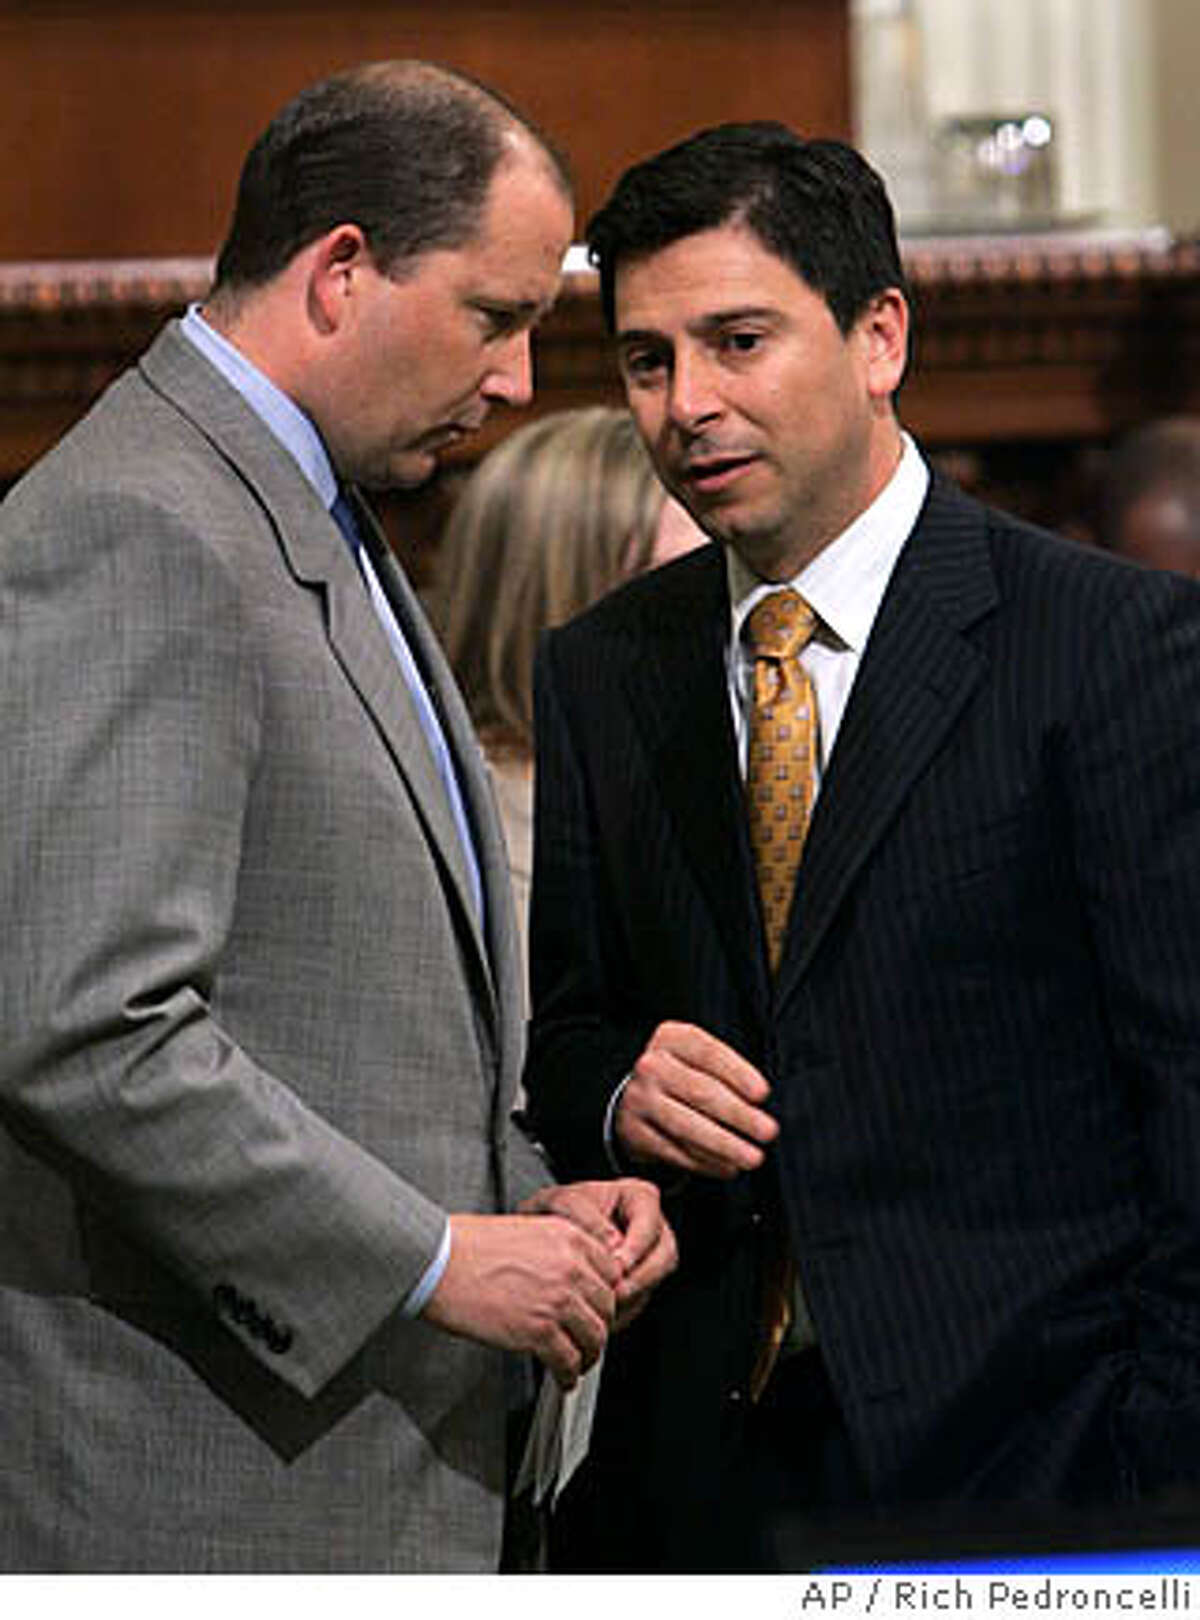 California assembly Minority Leader Mike Villines, R-Clovis, left, confers with Assembly Speaker Fabian Nunez, D-Los Angeles, as the Assembly debates a measure that would levy taxes on oil companies, at the Capitol in Sacramento, Calif., Wednesday, March 12, 2008. The measure, by Nunez, would tax petroleum companies 6 percent on the oil they extract in the state. Republicans opposed the measure which requires a two-thirds vote for passage. (AP Photo/Rich Pedroncelli)